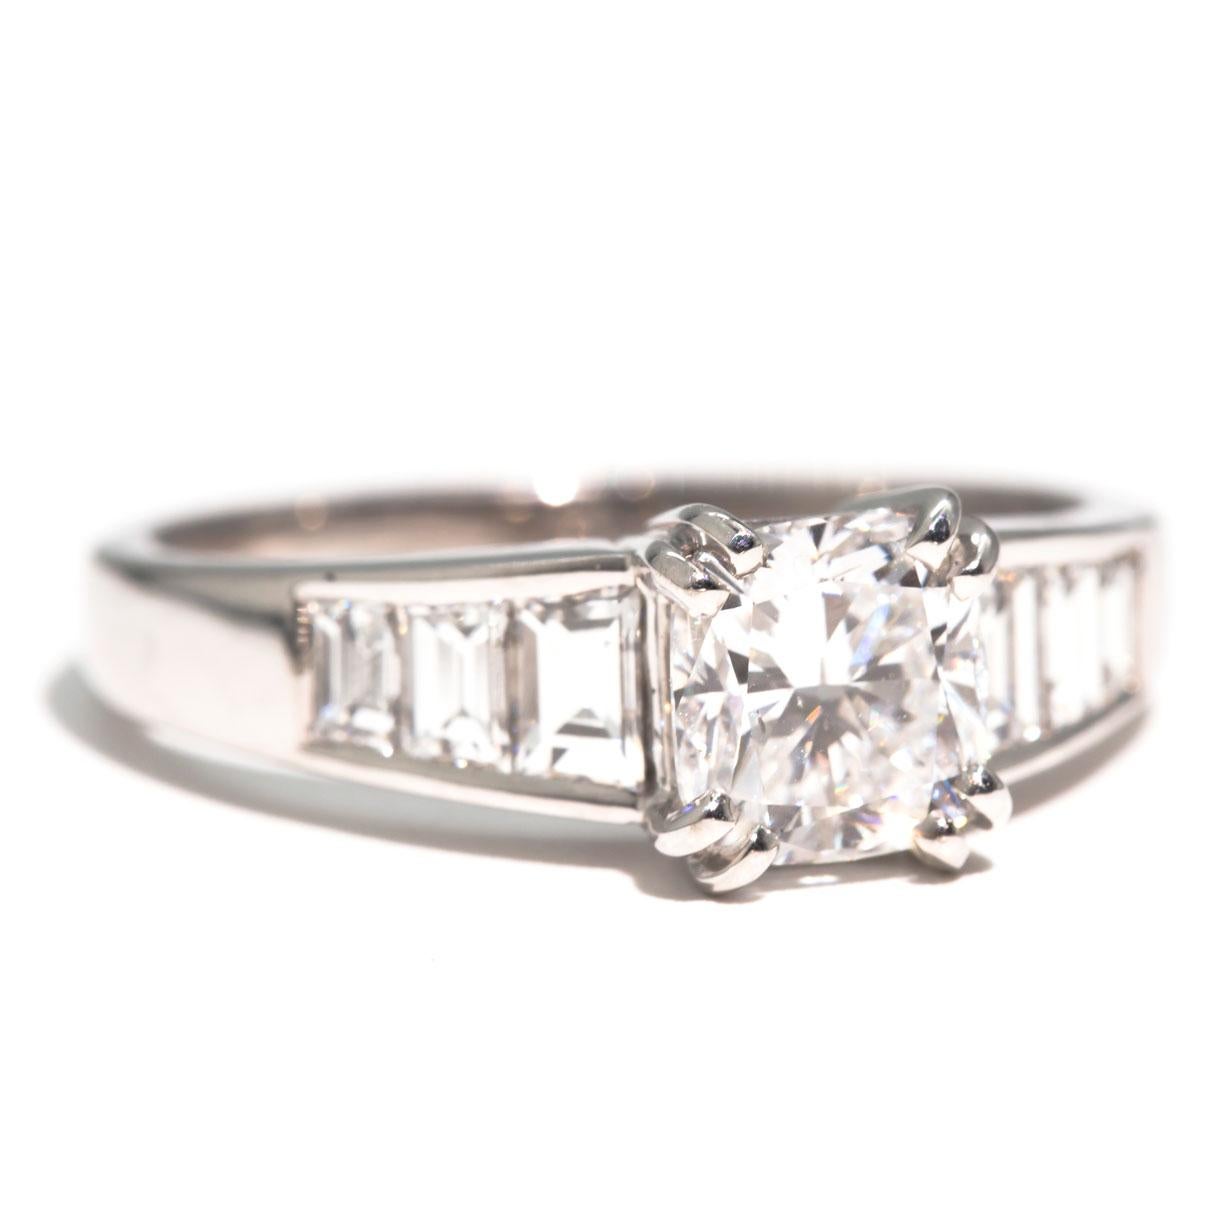 Crafted in 18 carat white gold is this breathtaking diamond engagement ring featuring a wondrous 1.52 Carat GIA certified cushion cut diamond flanked with bright white trapezoid diamonds in the band. We have named this stunning vintage ring The